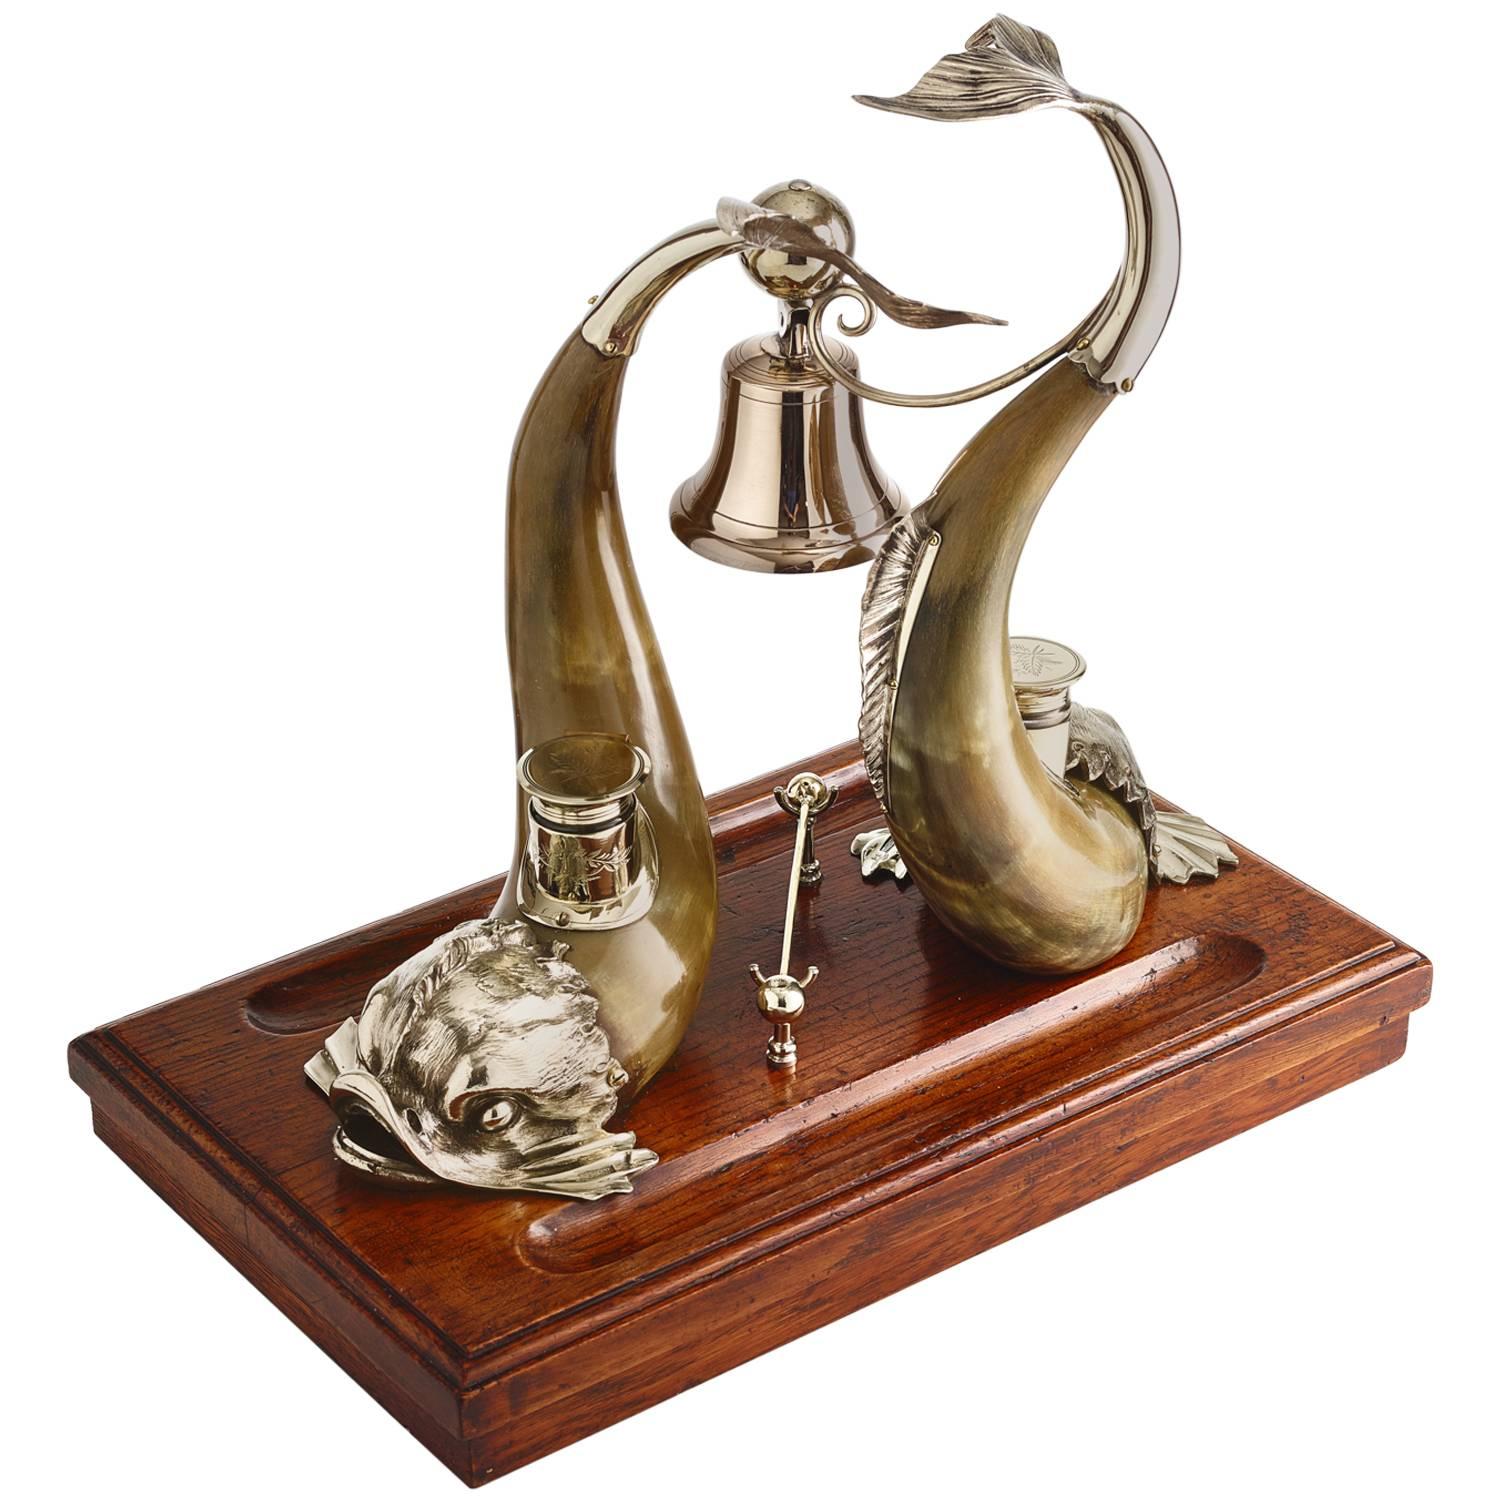 A large and impressive, horn and silver plate ink stand partners desk centrepiece, circa 1910.
It comprises two superb mythical sea creatures in horn and silver-plate and two hinged lid inkwells. 
There is also a bell, which could have been used to